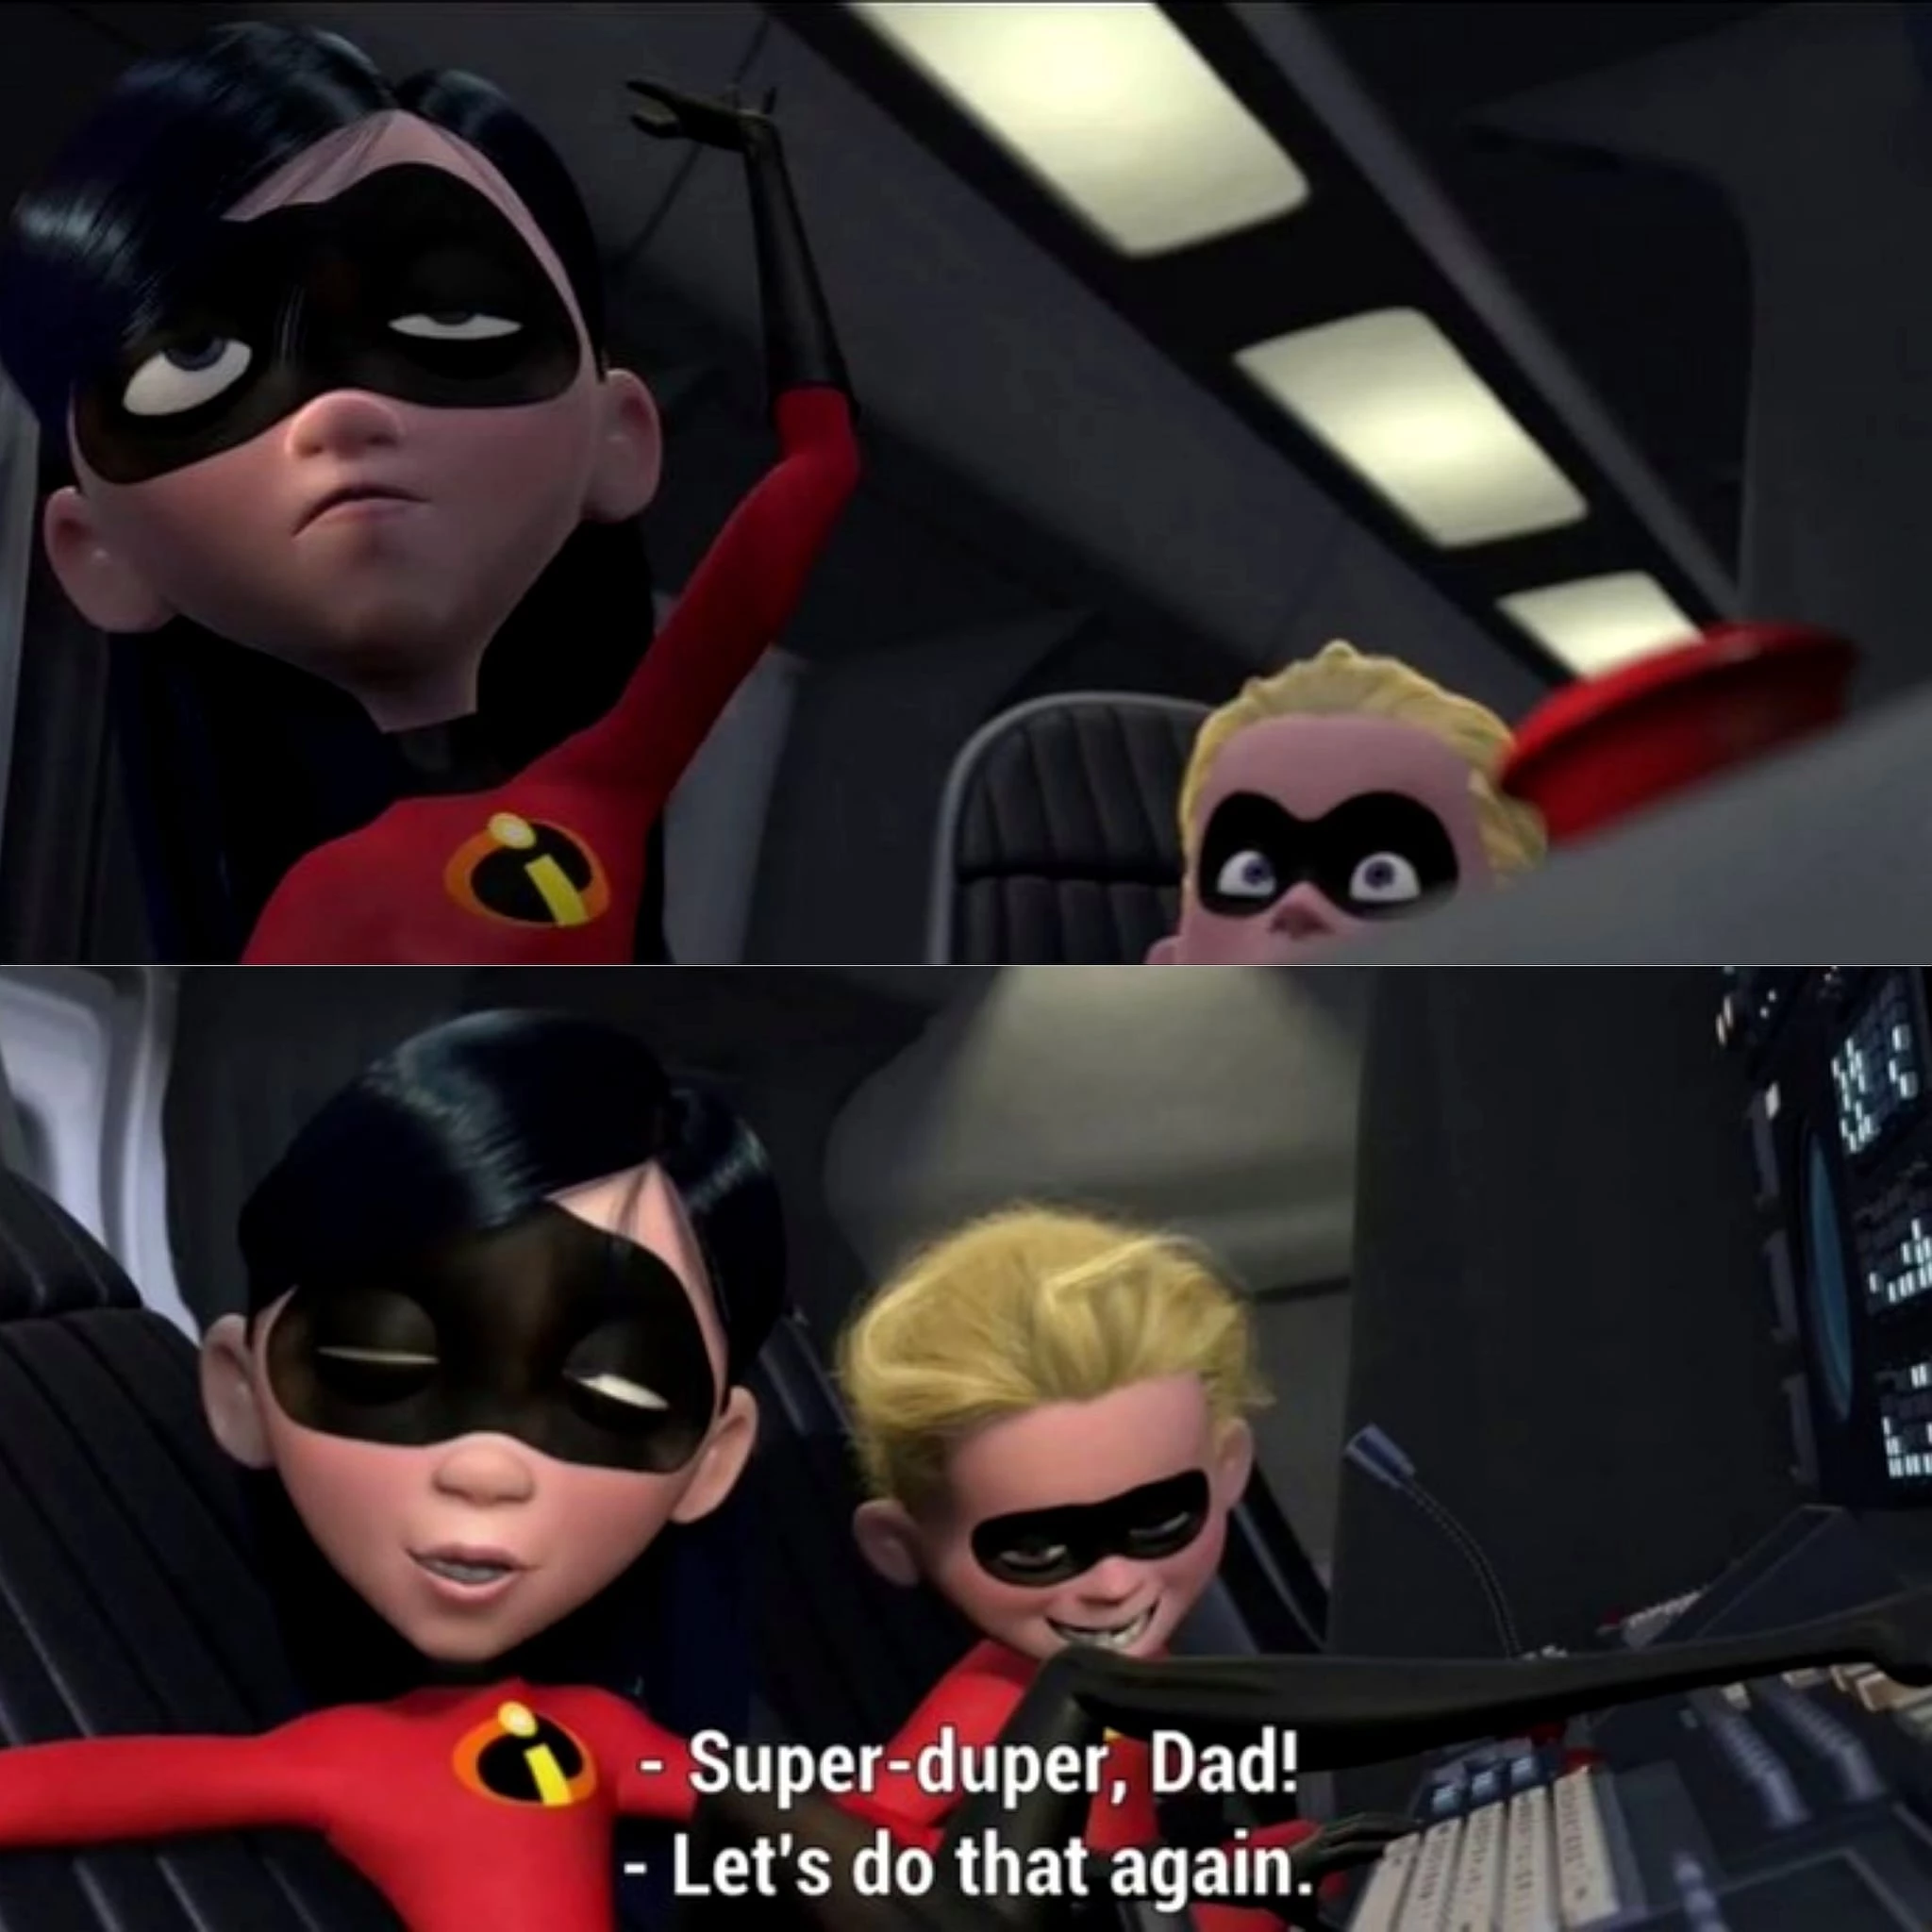 The Incredibles With The Over-The-Top Expressions Is At It Again